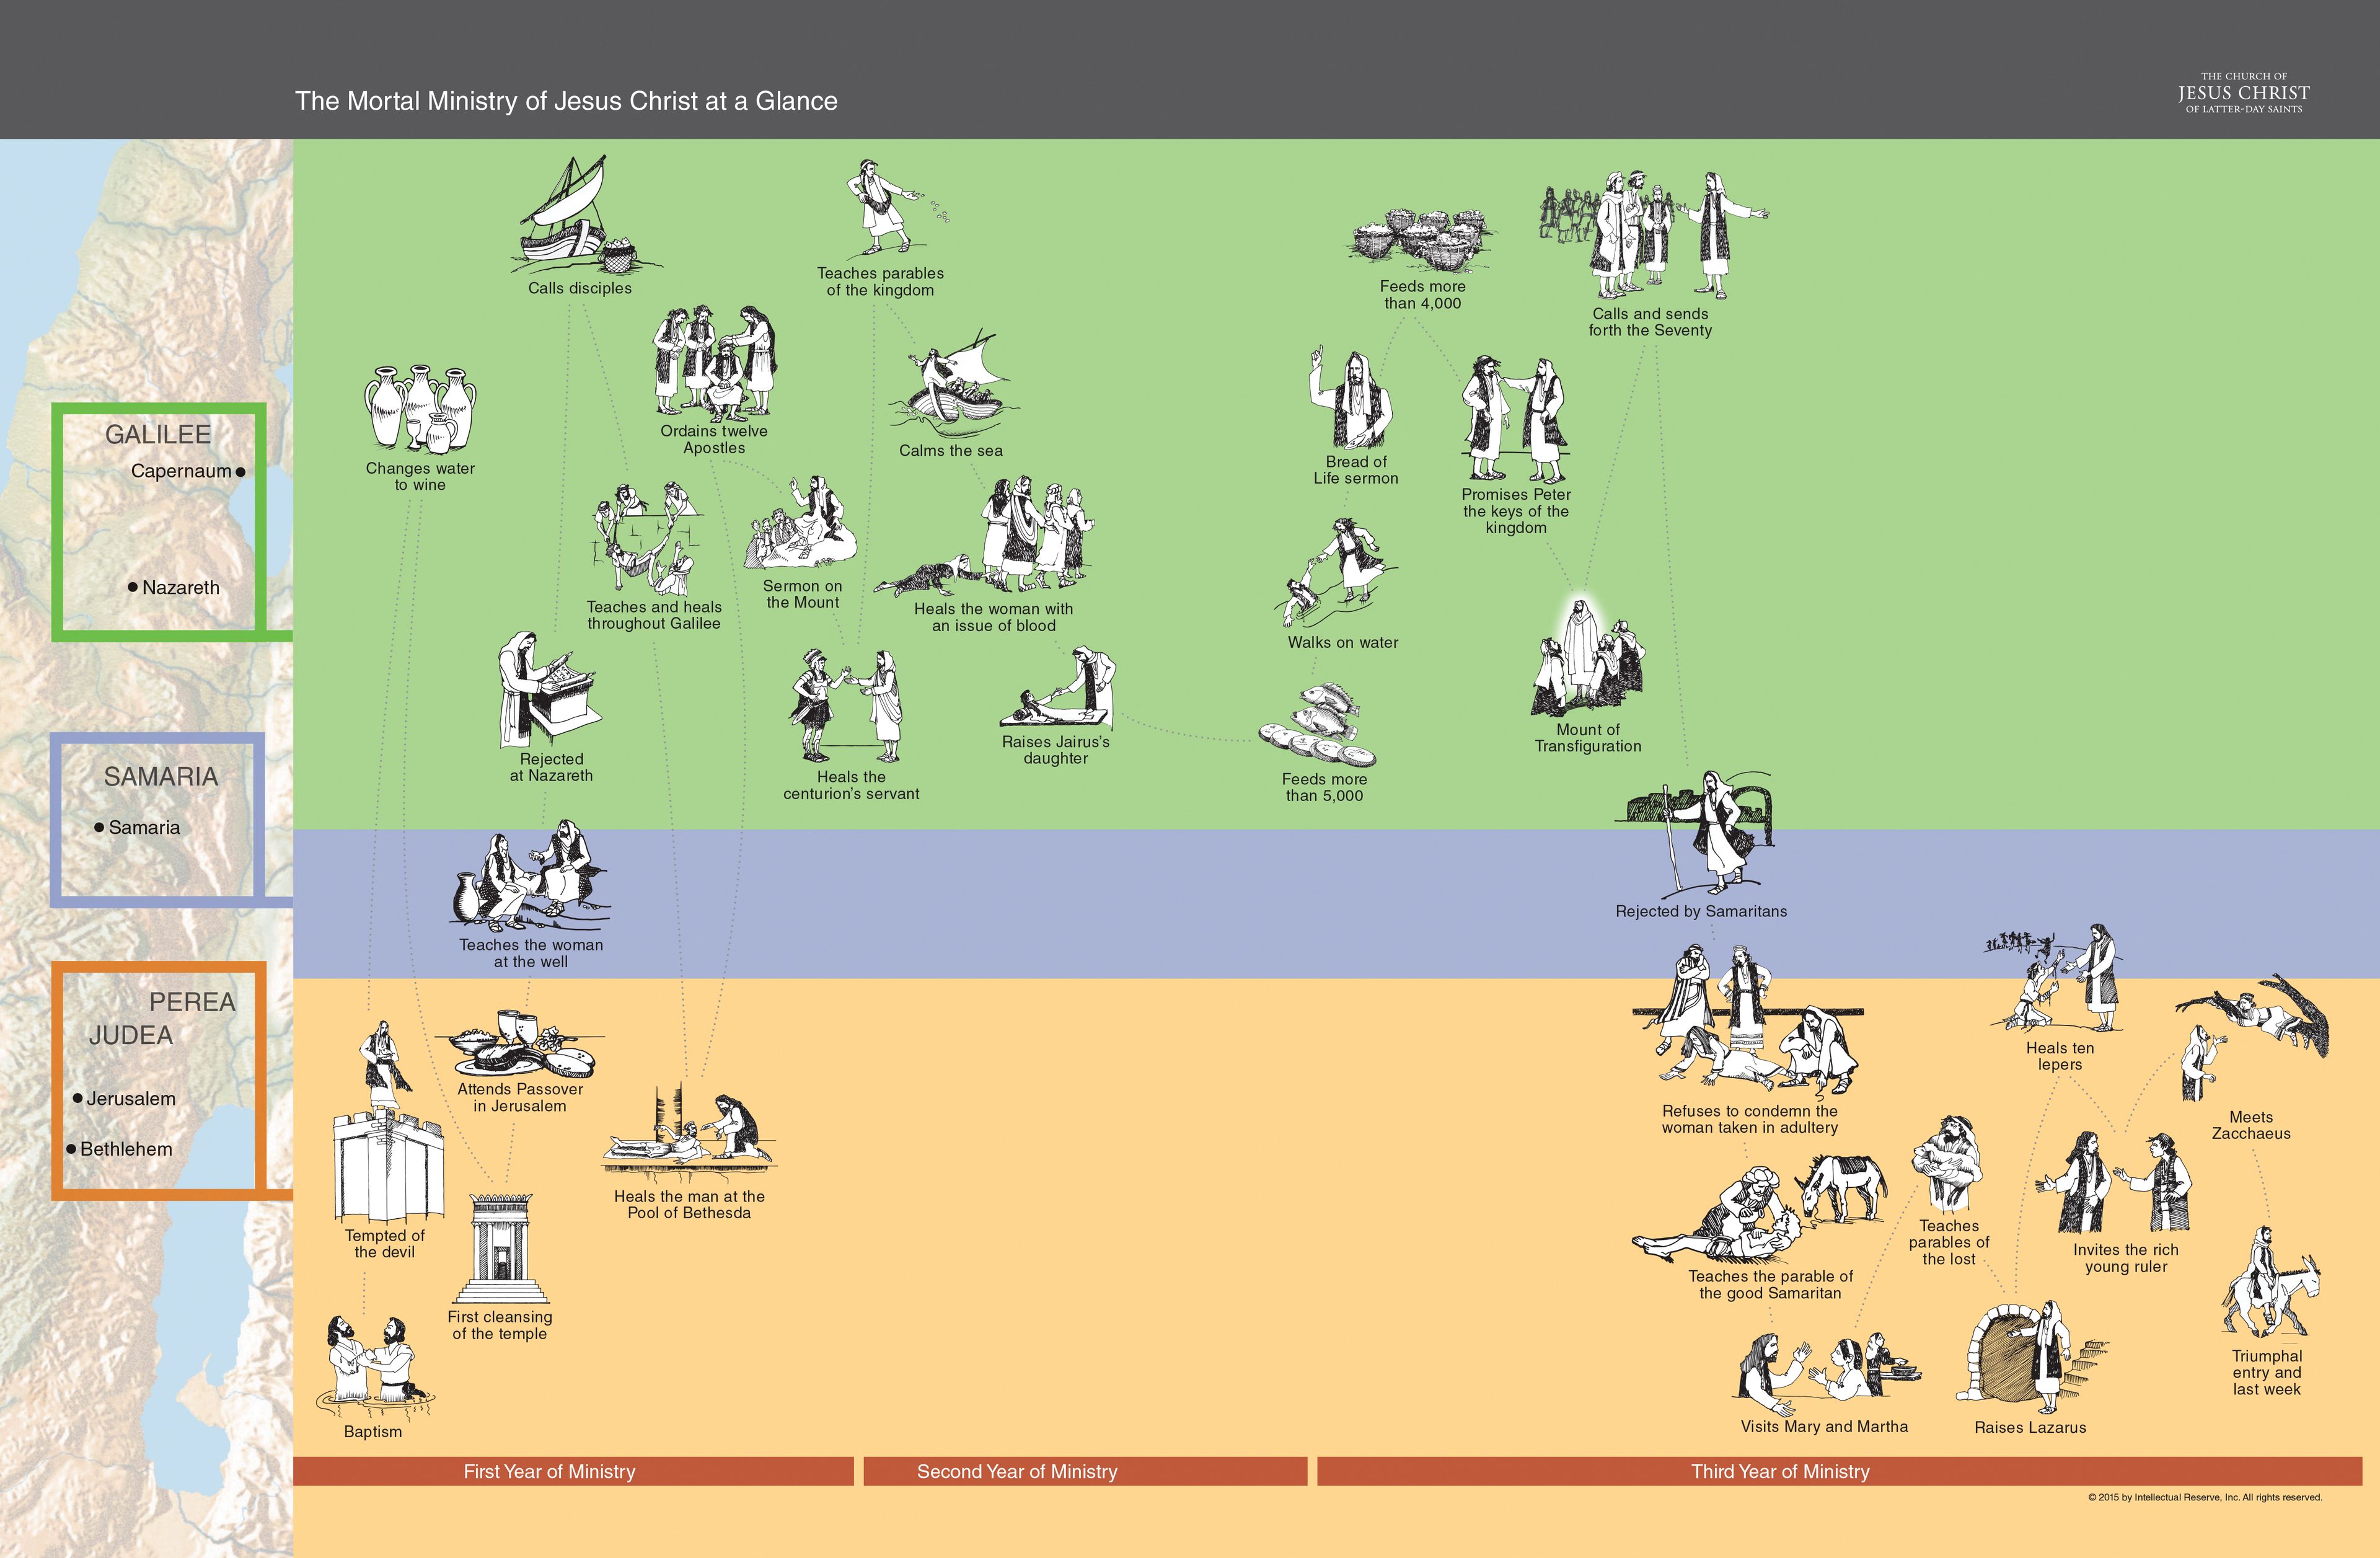 This diagram provides an at-a-glance overview of Jesus Christ's mortal ministry.